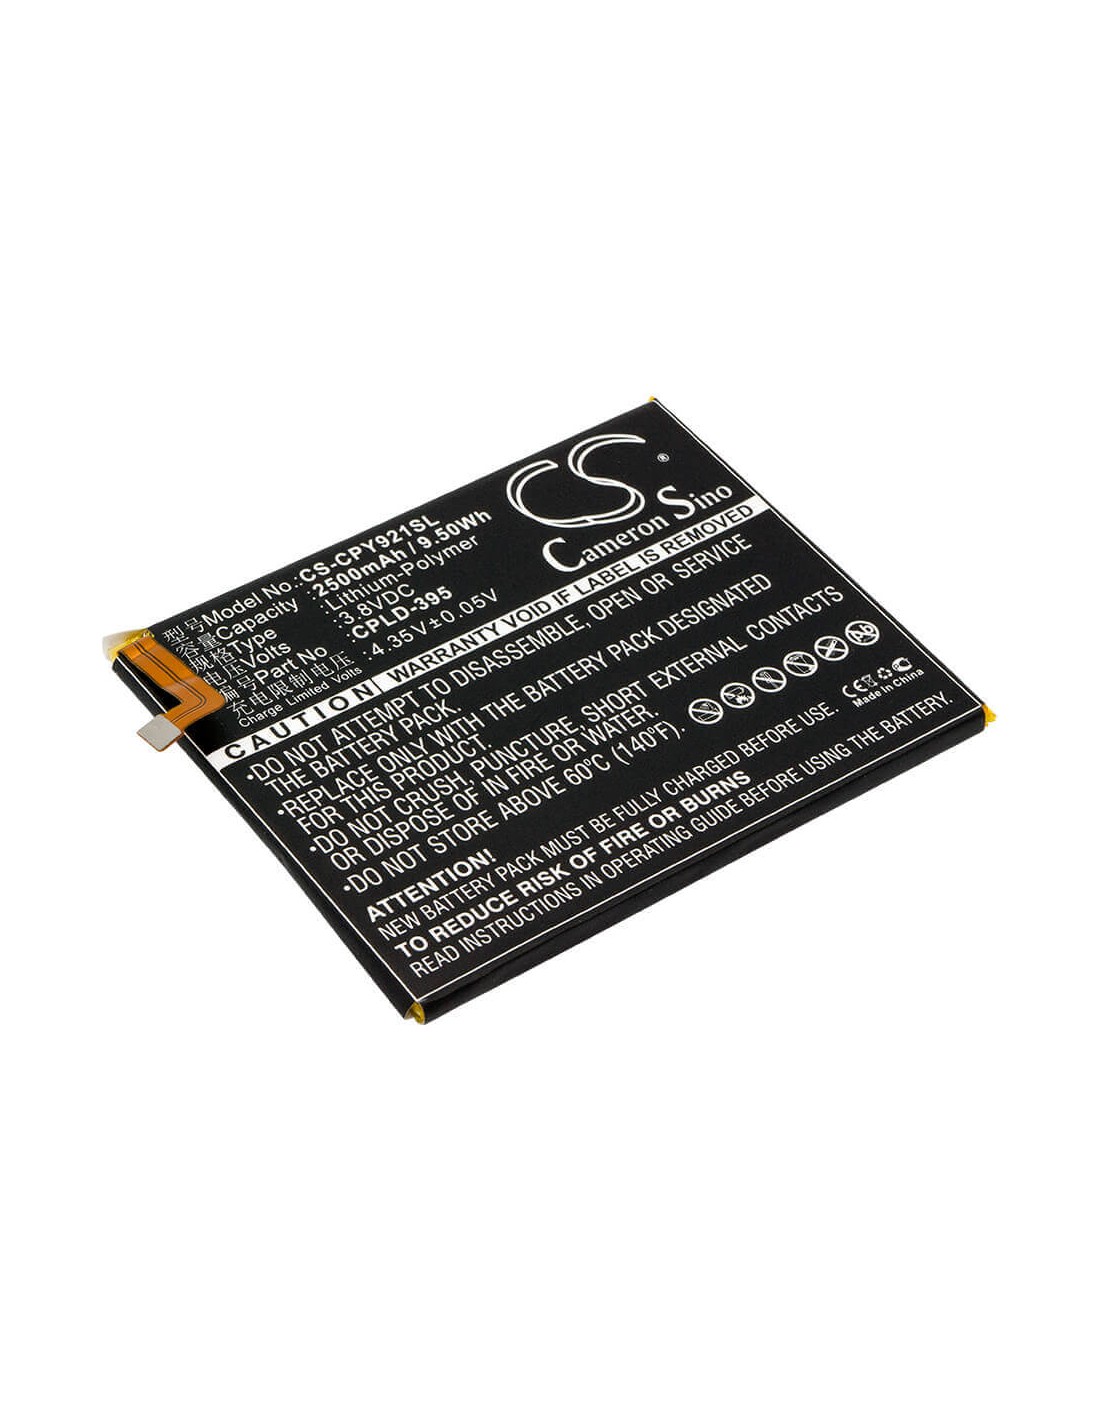 Battery for Coolpad, Fengshang Pro 2, Fengshang Pro 2 Dual Sim 3.8V, 2500mAh - 9.50Wh